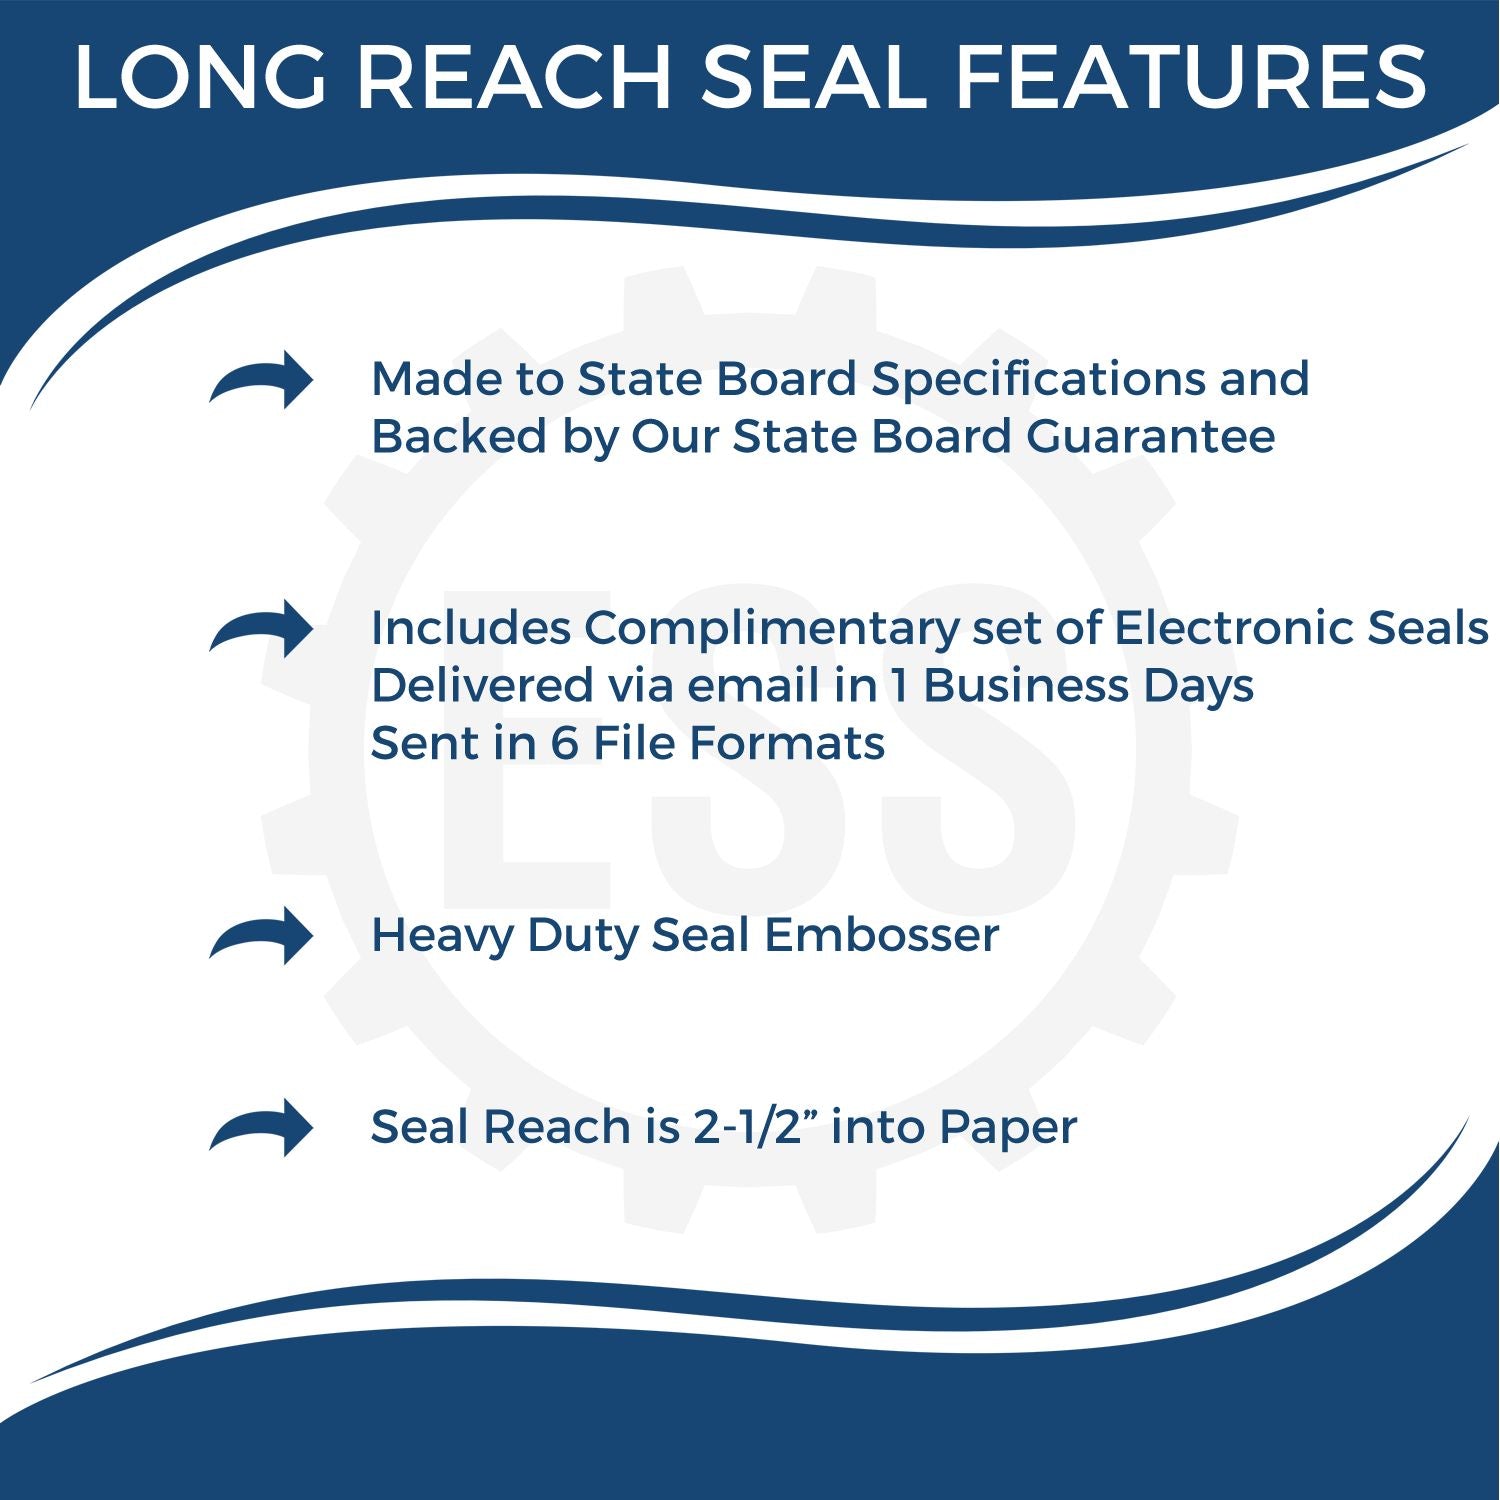 The main image for the Long Reach South Dakota PE Seal depicting a sample of the imprint and electronic files